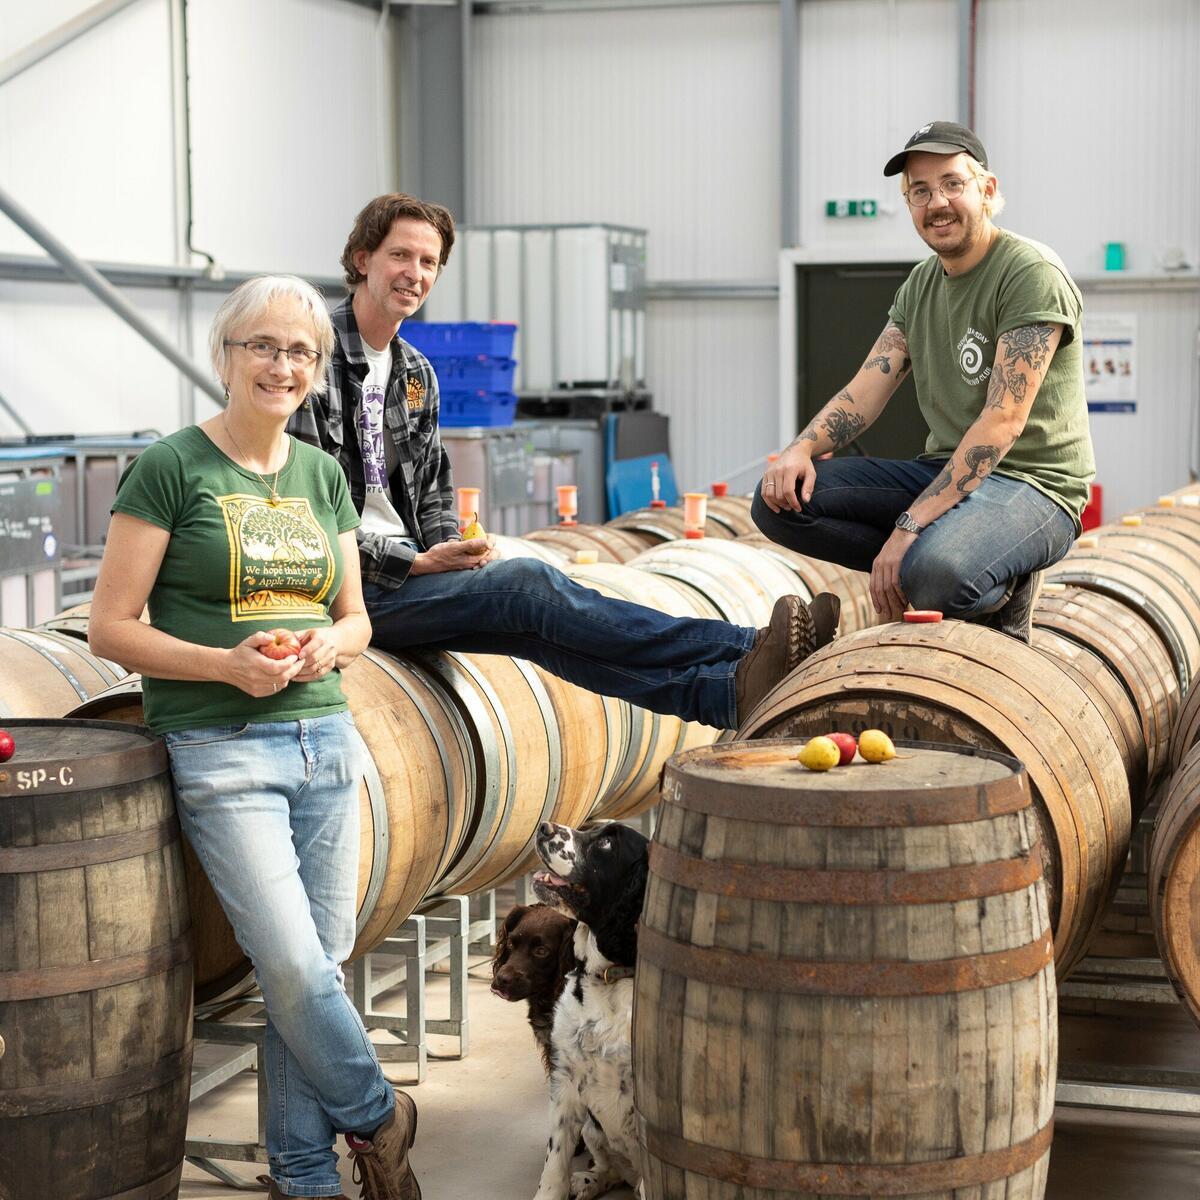 Meet the makers 🍎 Take a tour to go behind the scenes into the cidery